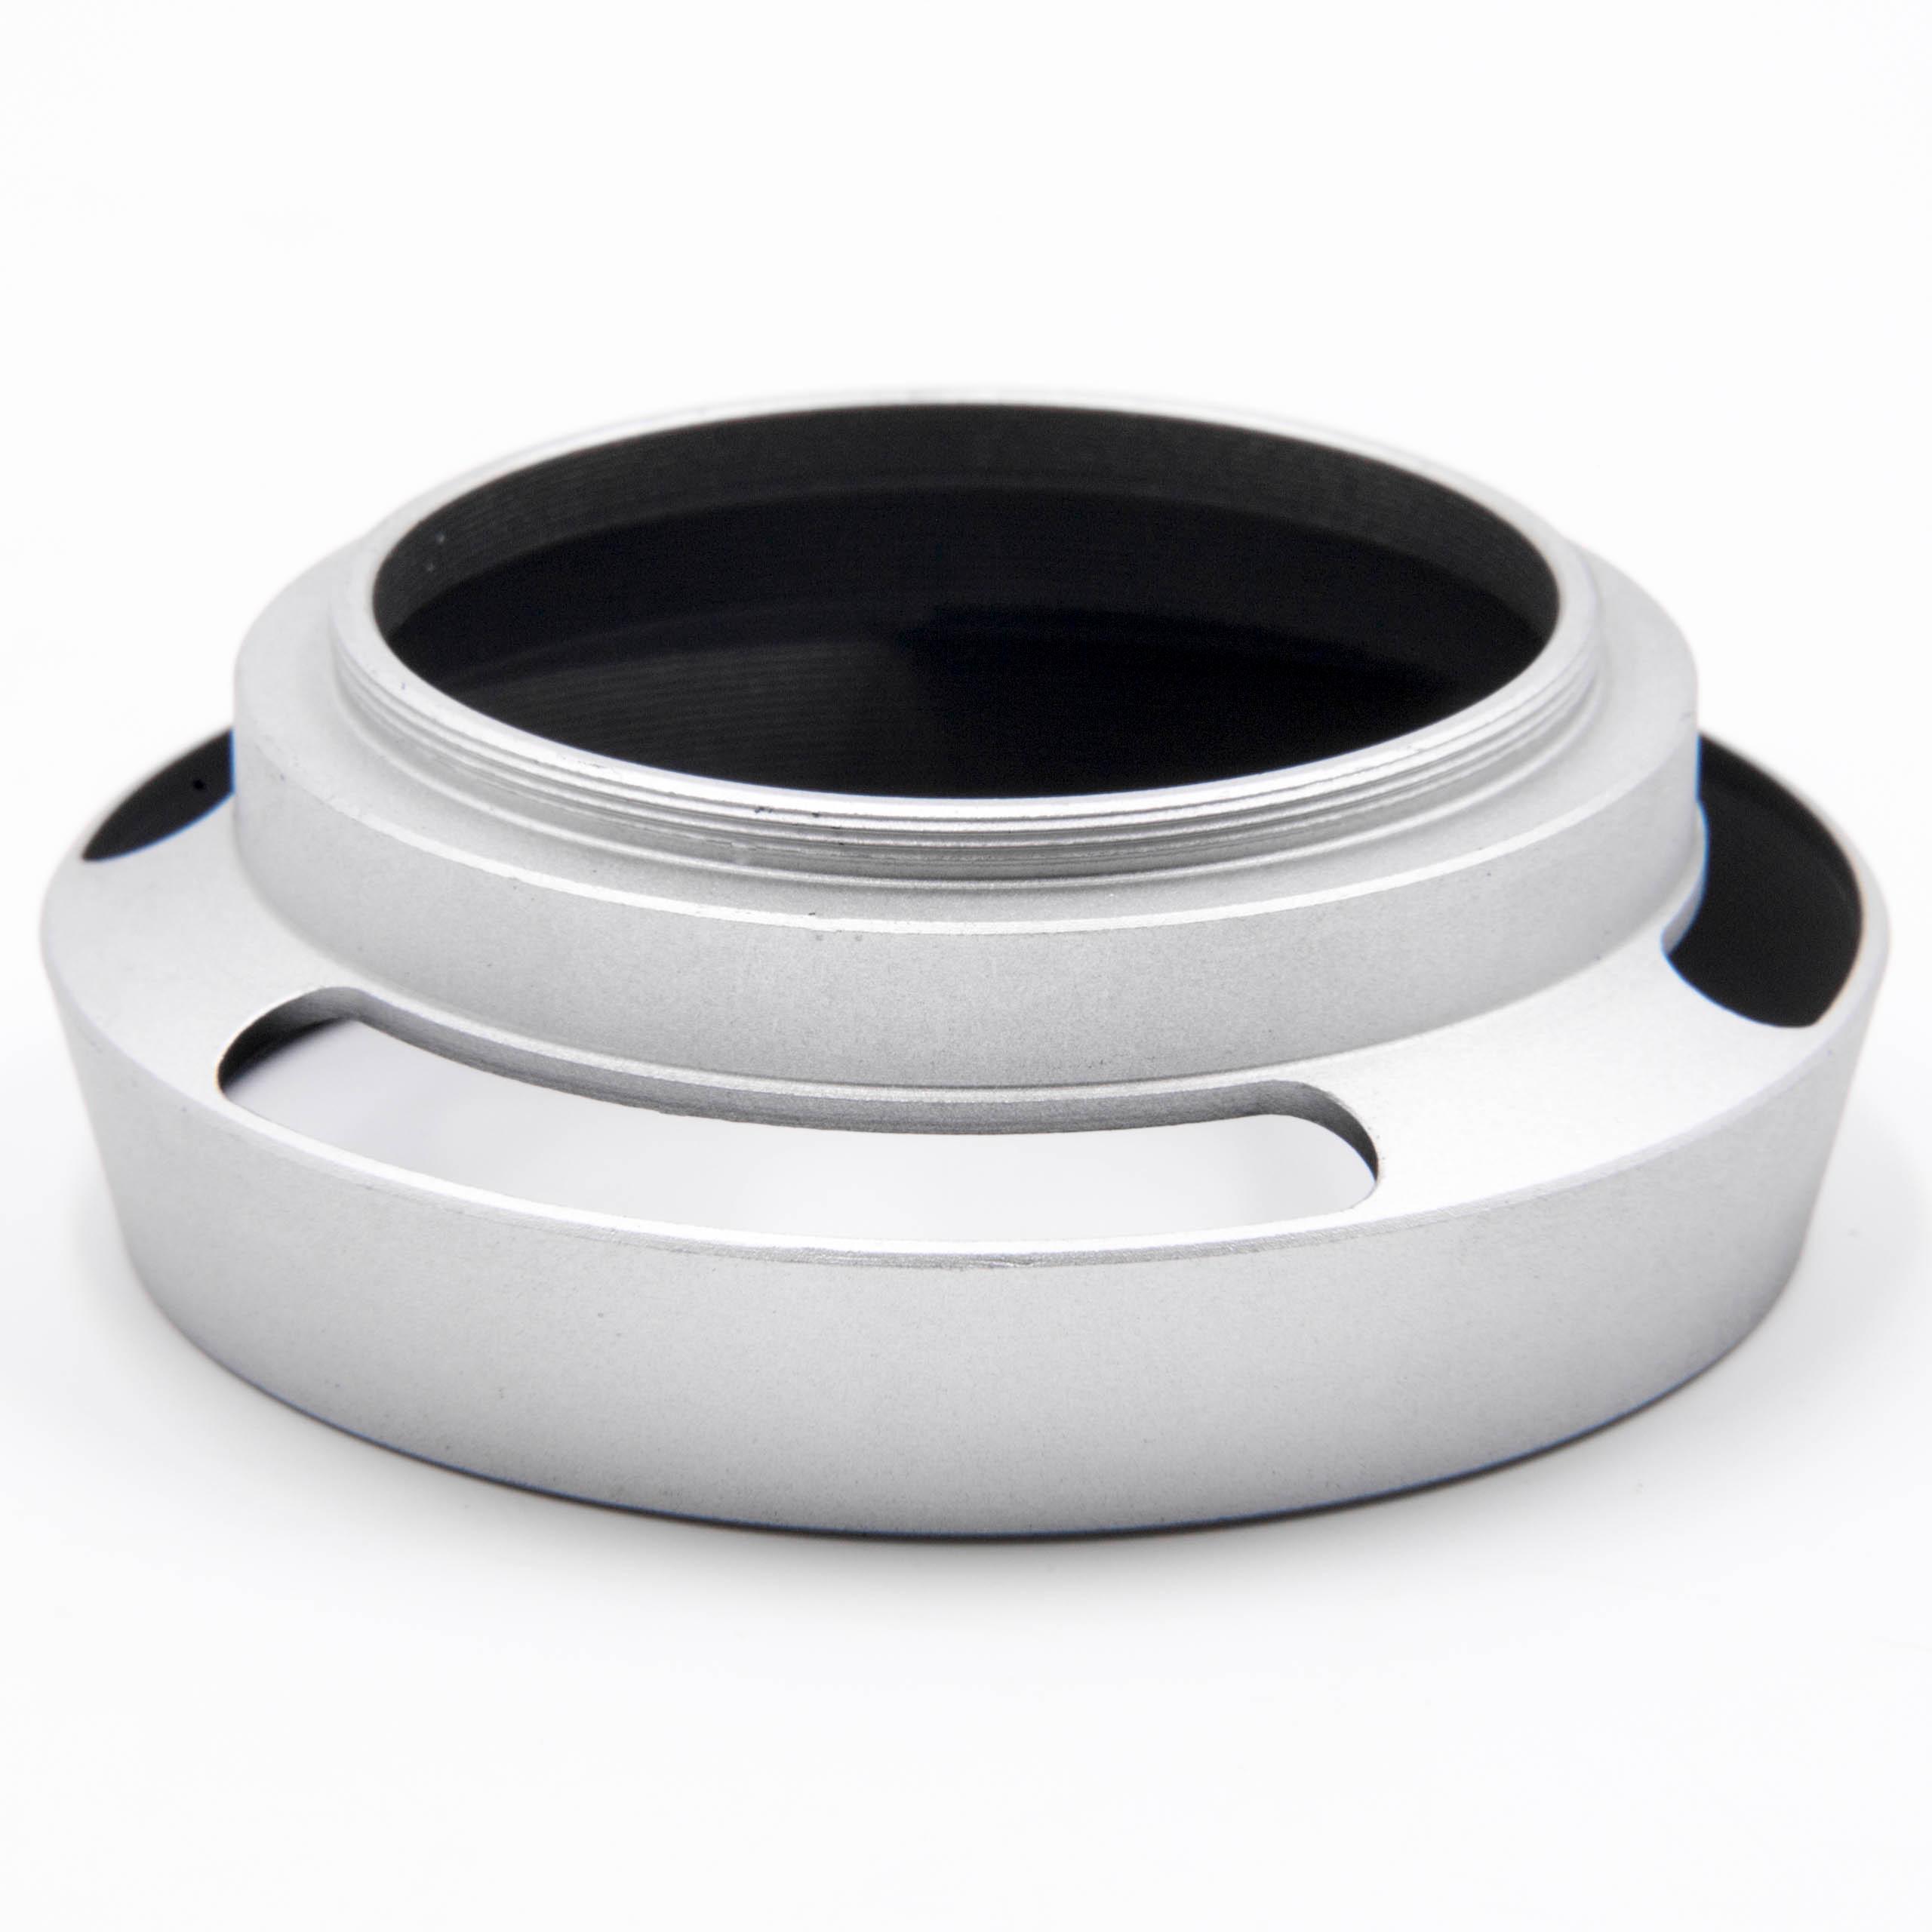 Lens Hood suitable for 40.5mm Lens - Lens Shade Silver, Round